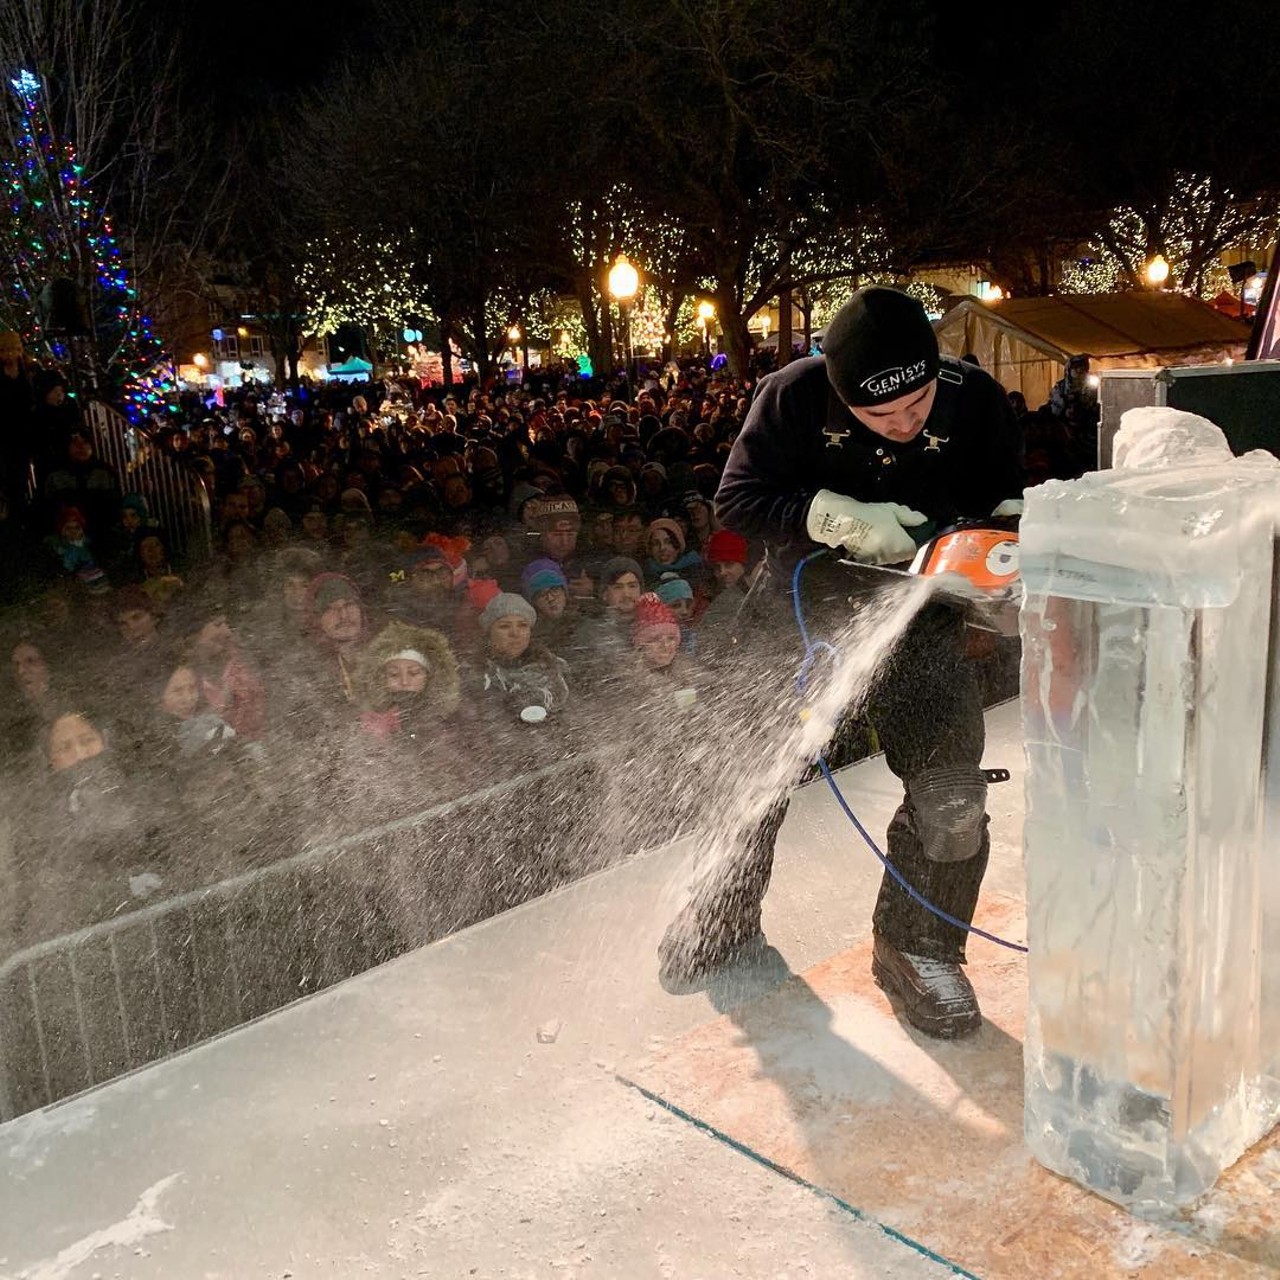 Plymouth Ice Festival
Jan. 10-12, 10 a.m. - 10 p.m.
Downtown Plymouth; 248-817-8836; plymouthicefestival.com
You will freeze in awe if you attend the Plymouth Ice Festival. The ice festival will hold many remarkable ice sculptures showing the beauty of the winter.
Photo via Plymouth Ice Festival / Facebook